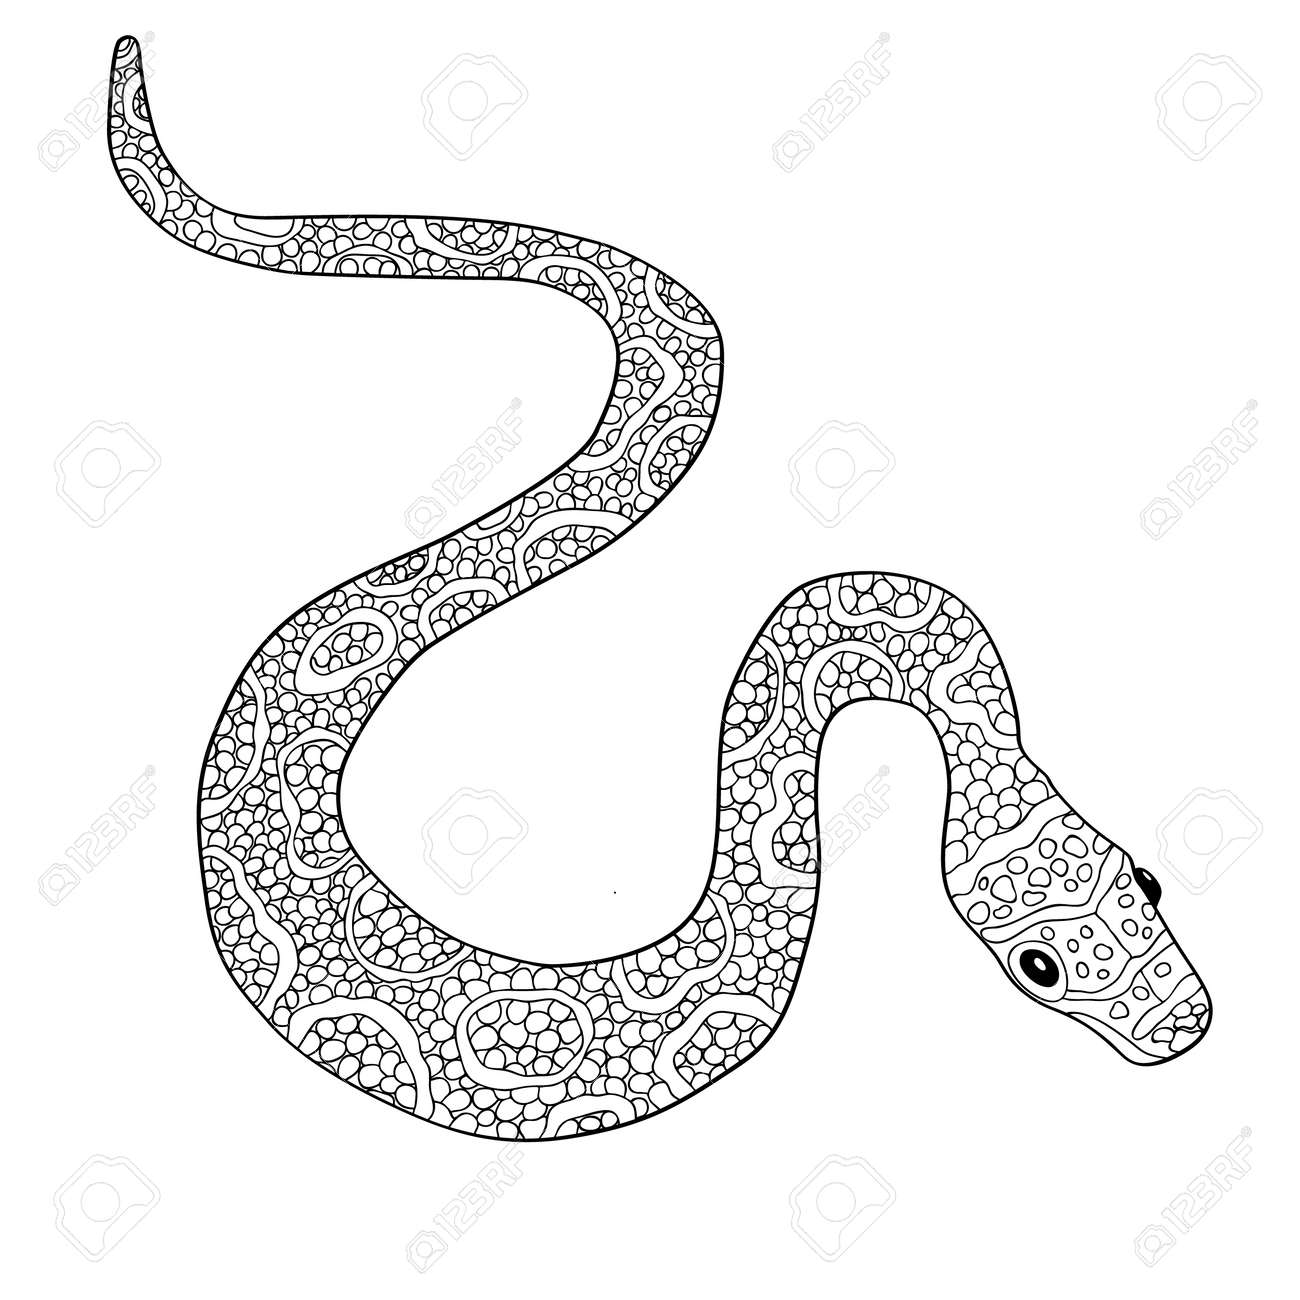 Hand drawn vector doodle outline snake decorated with ornamentsready for adult anti stress coloring book royalty free svg cliparts vectors and stock illustration image